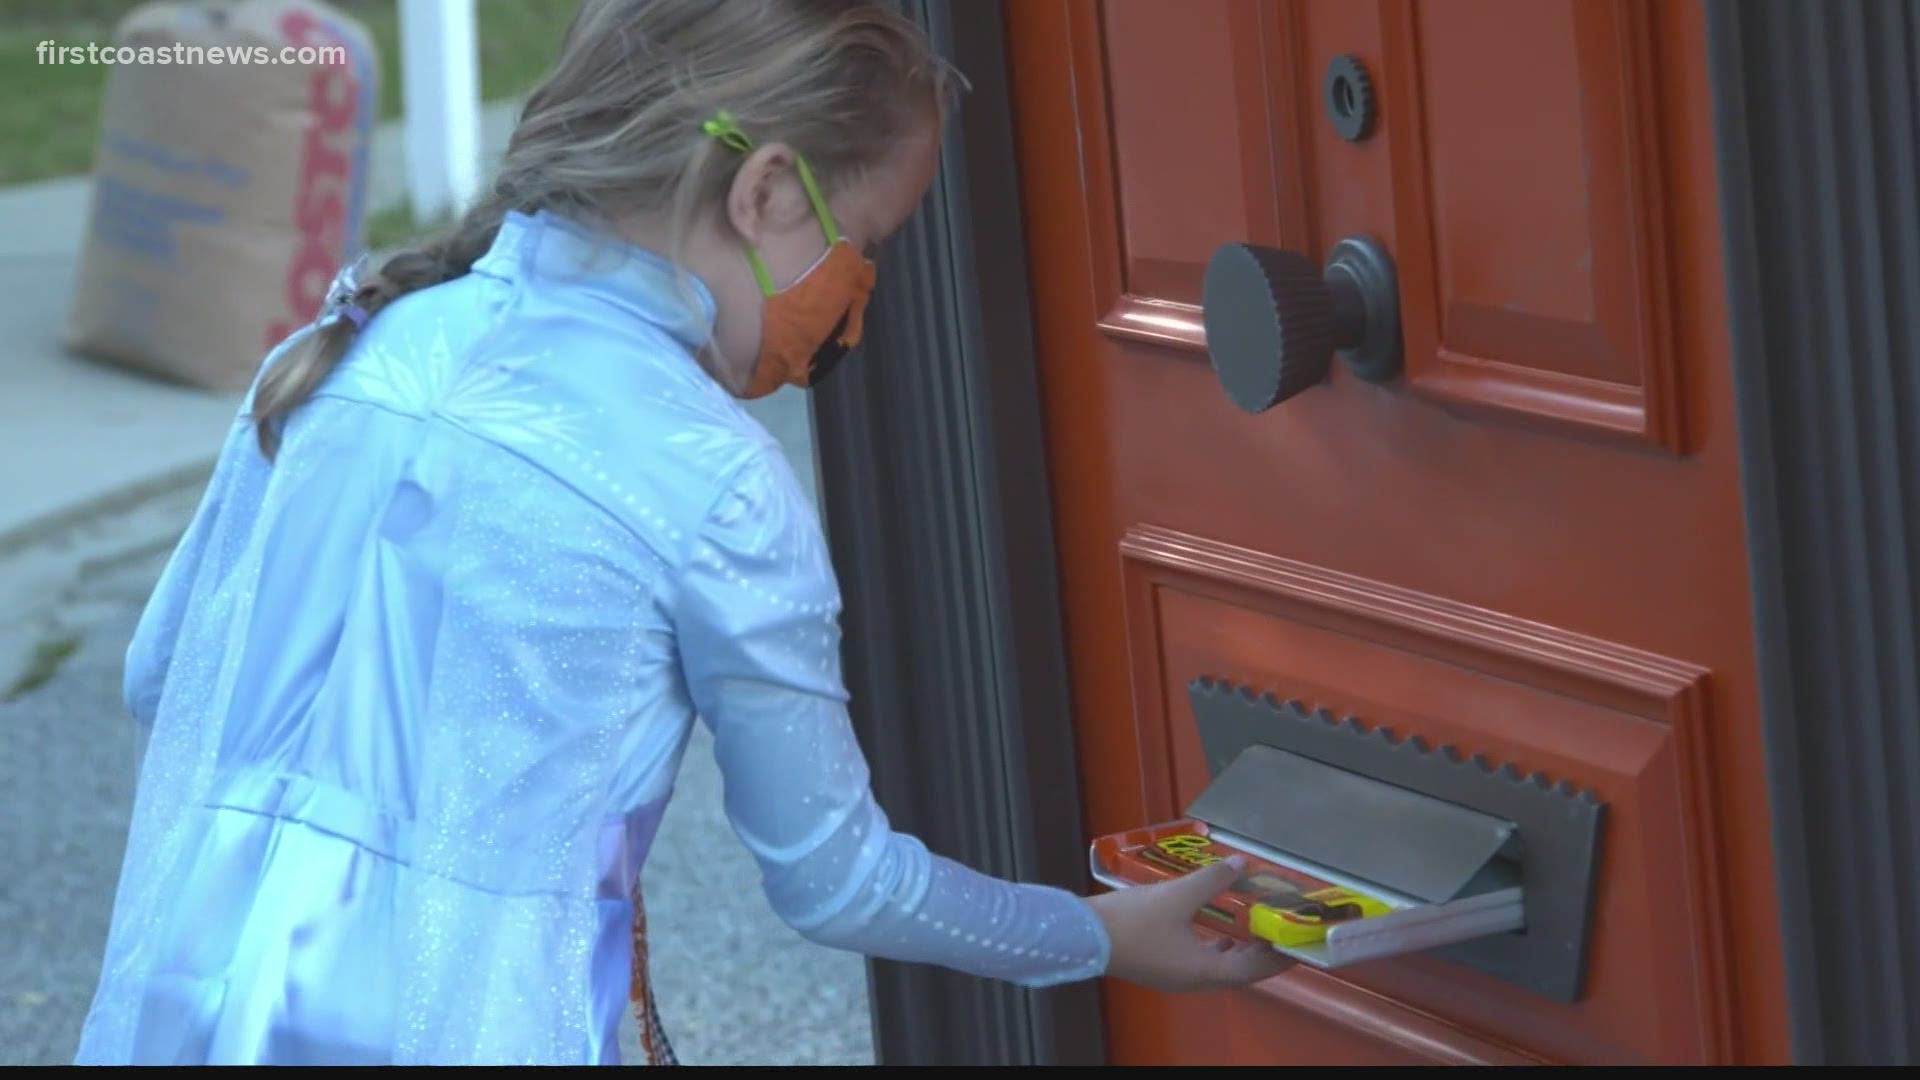 The candy maker created a trick-or-treat door designed to roll through neighborhoods to dispense chocolate.